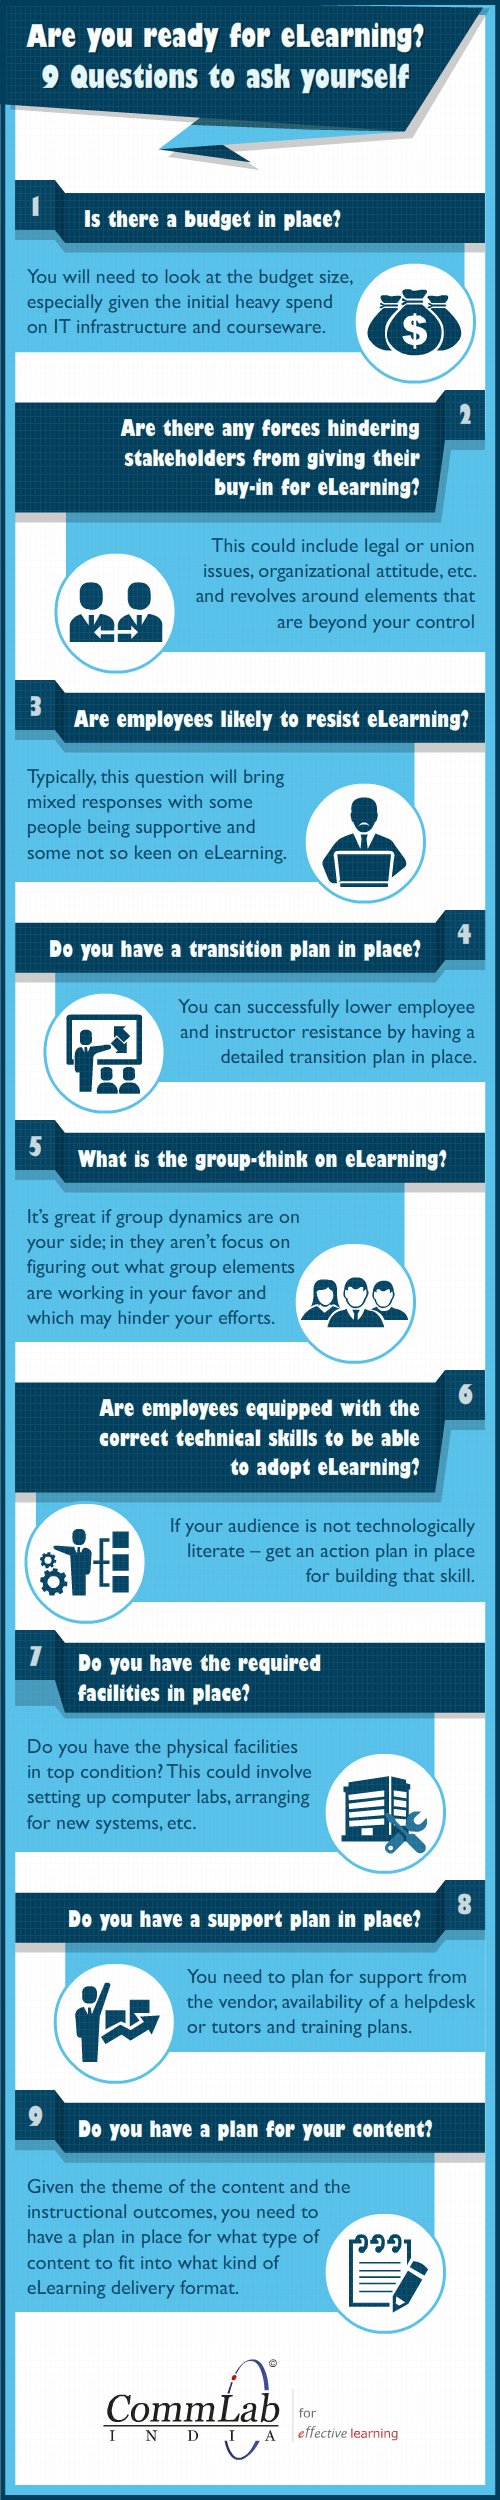 Are you Ready for E-learning? - 9 Questions to Ask Yourself